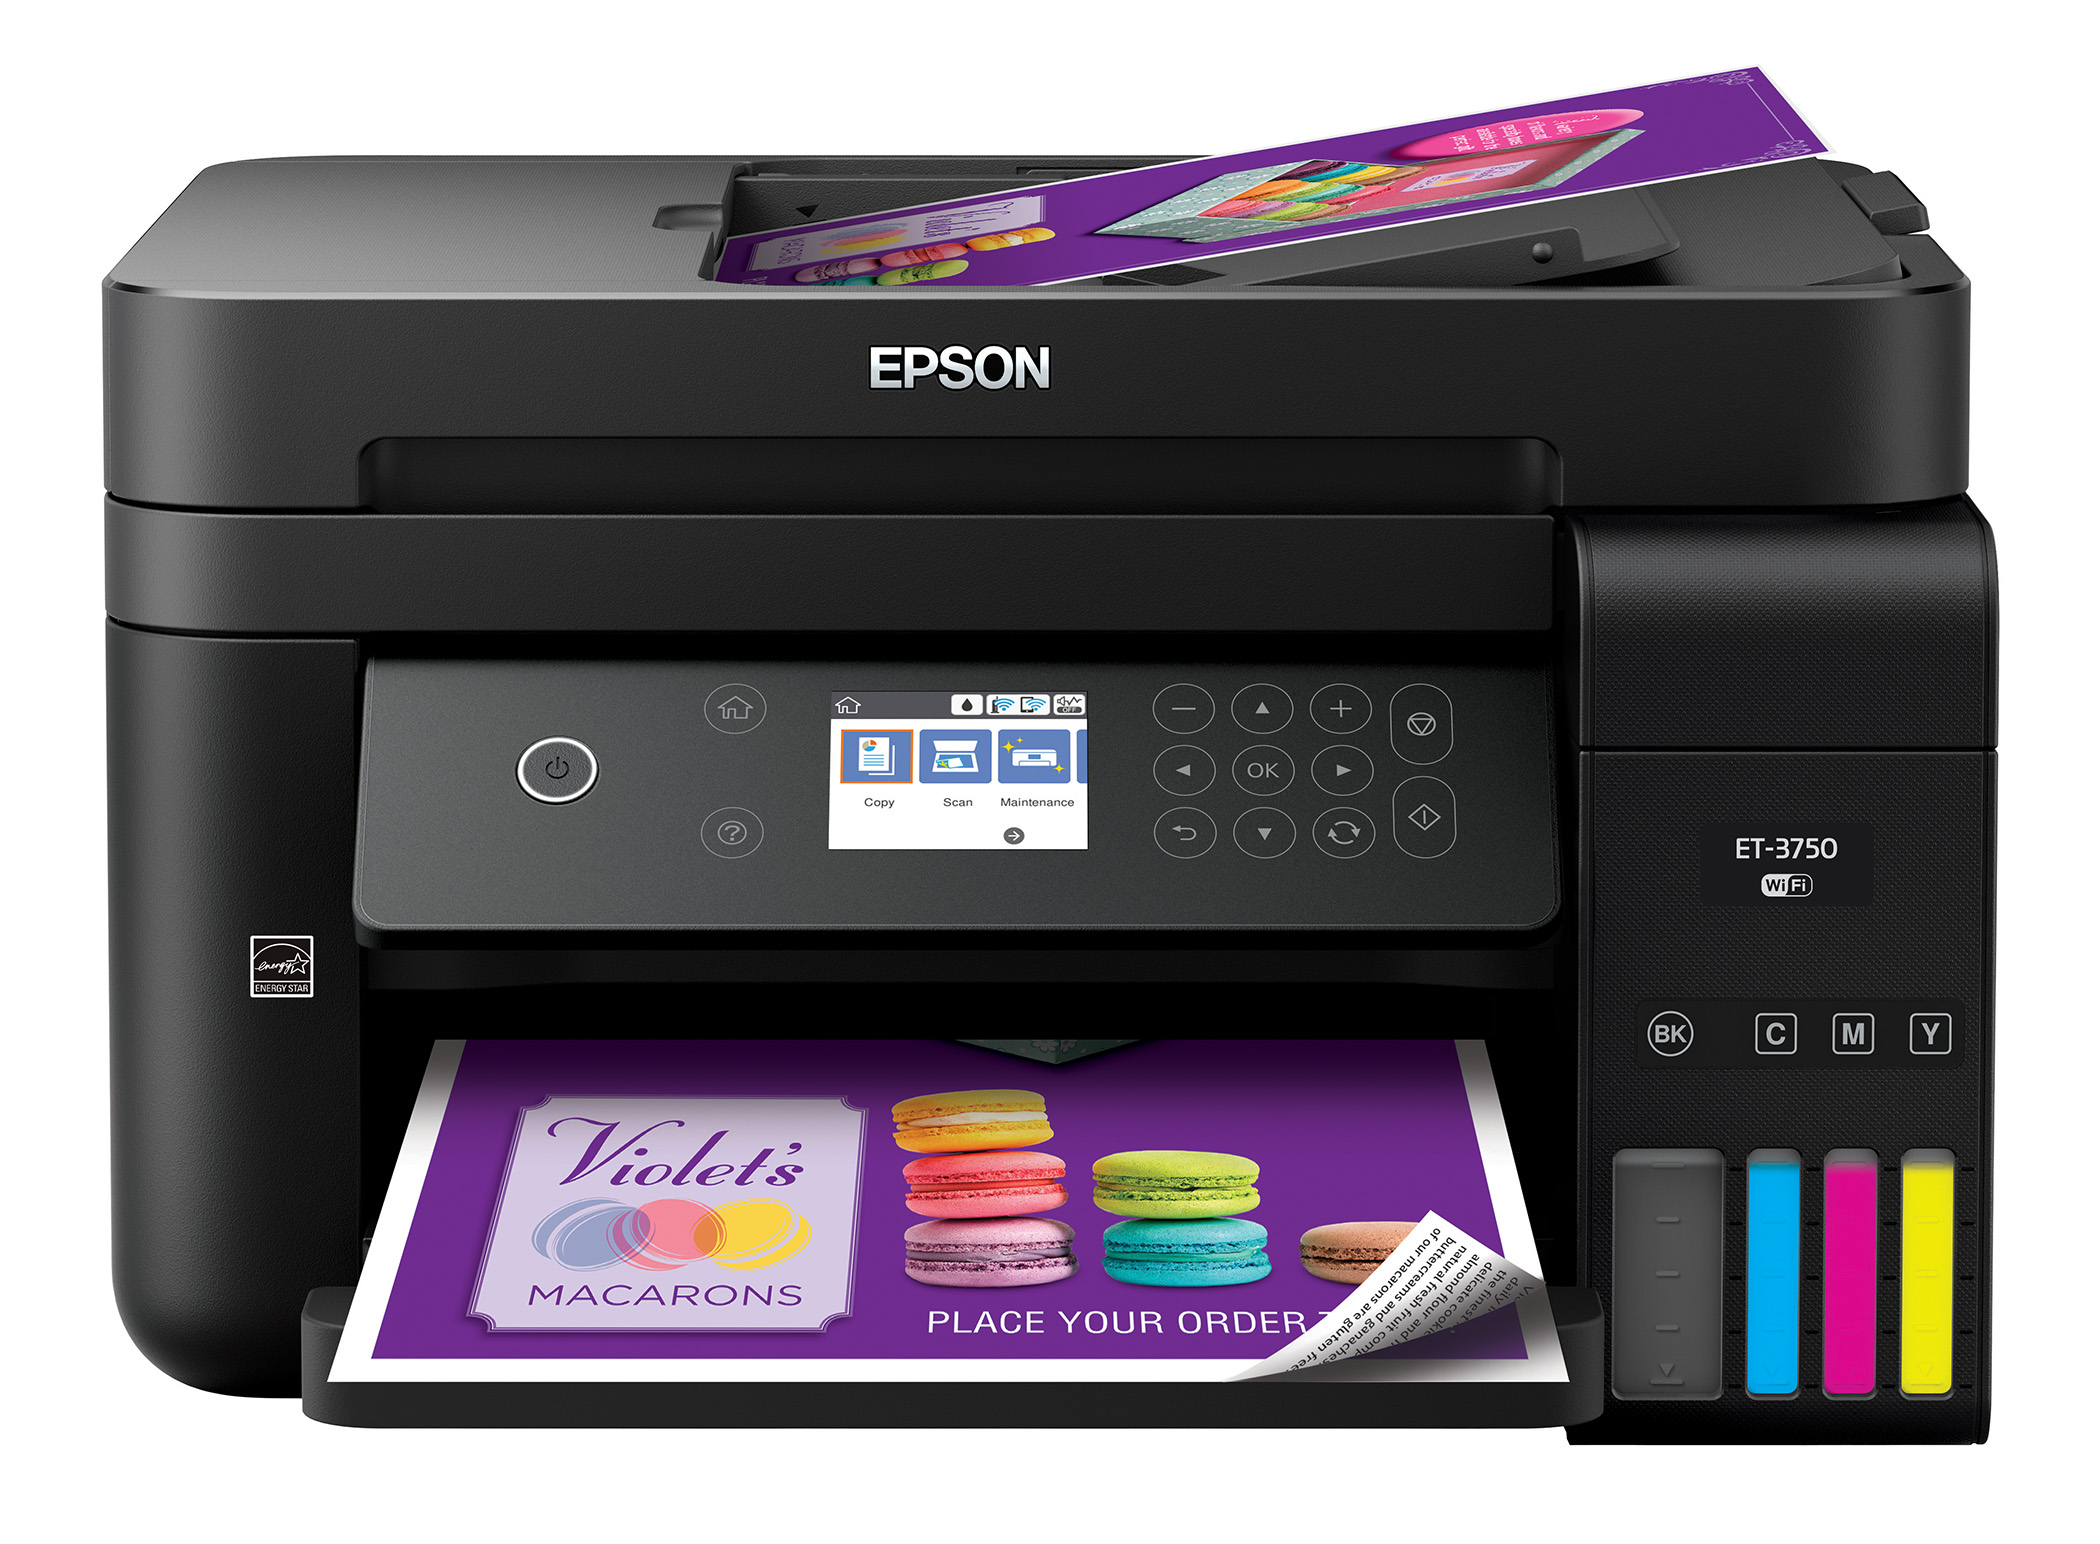 The Epson WorkForce ET-3750 EcoTank all-in-one with cartridge-free printing offers an unbeatable combination of value and convenience for the office.